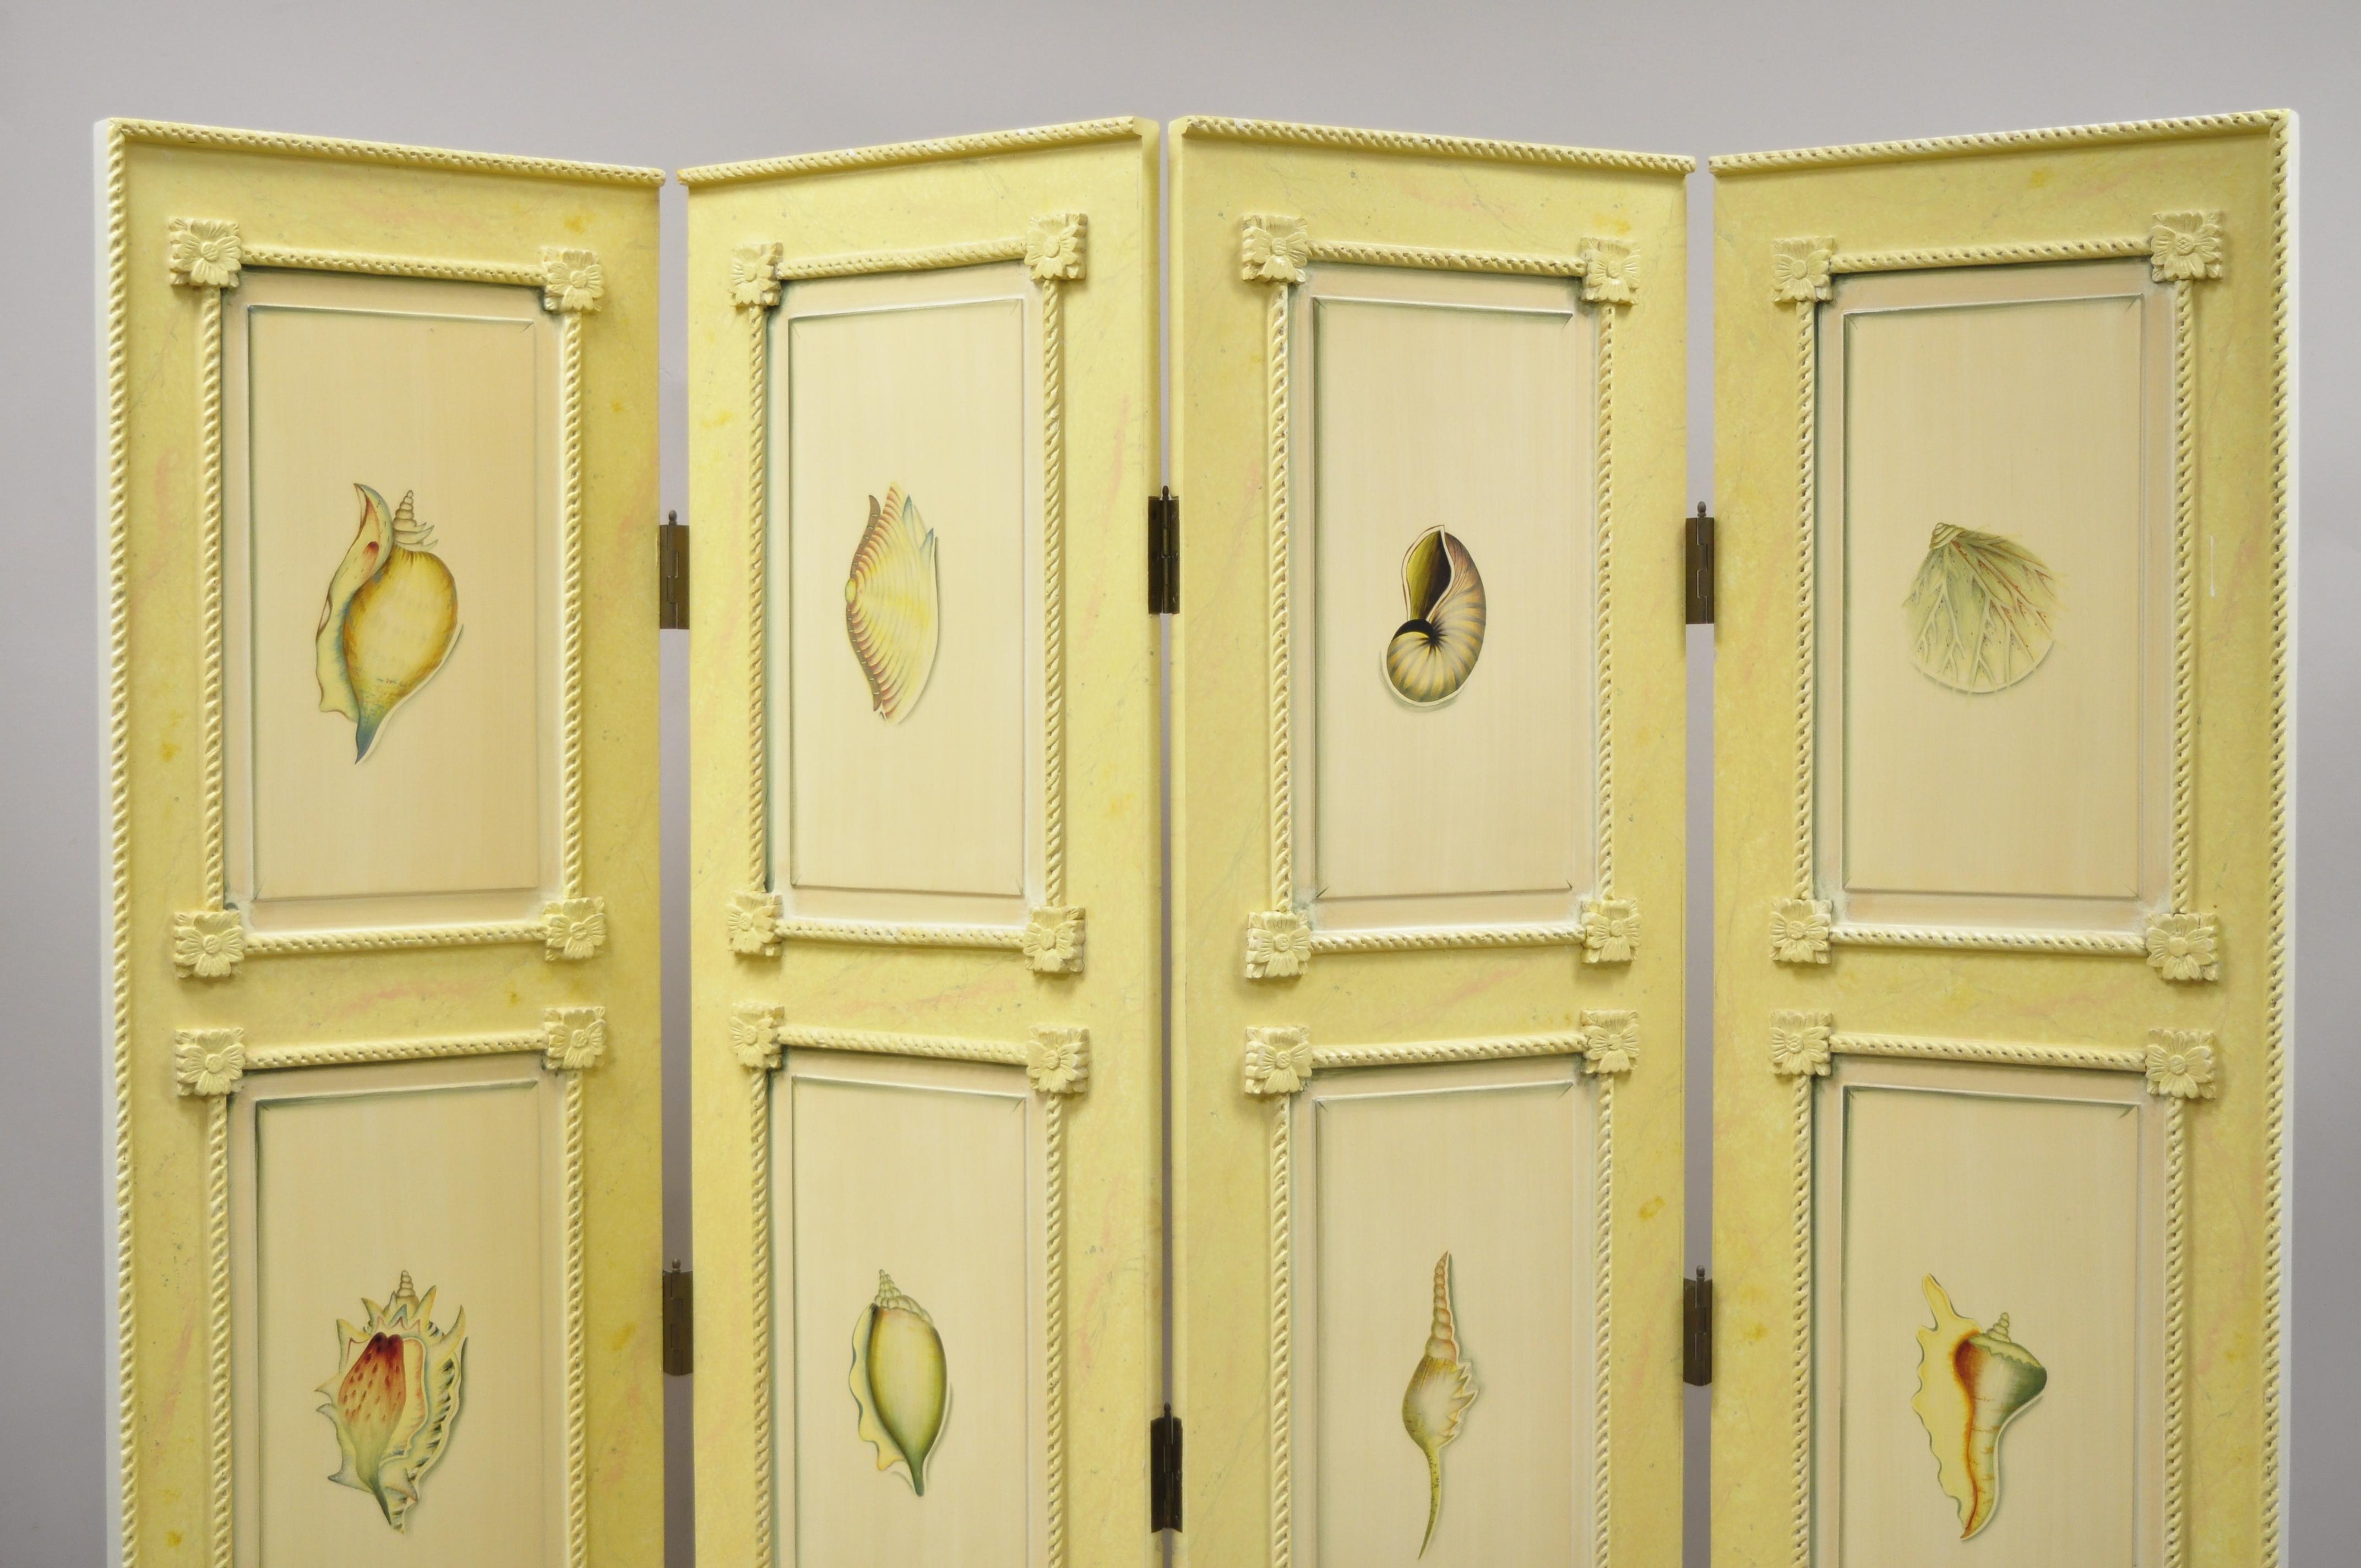 Nautical four panel yellow painted folding screen room divider with painted conch seashells. Item features 4 panels, curved rope picture frame trim, painted conch seashell sections, painted on both sides, very nice vintage item, great style and